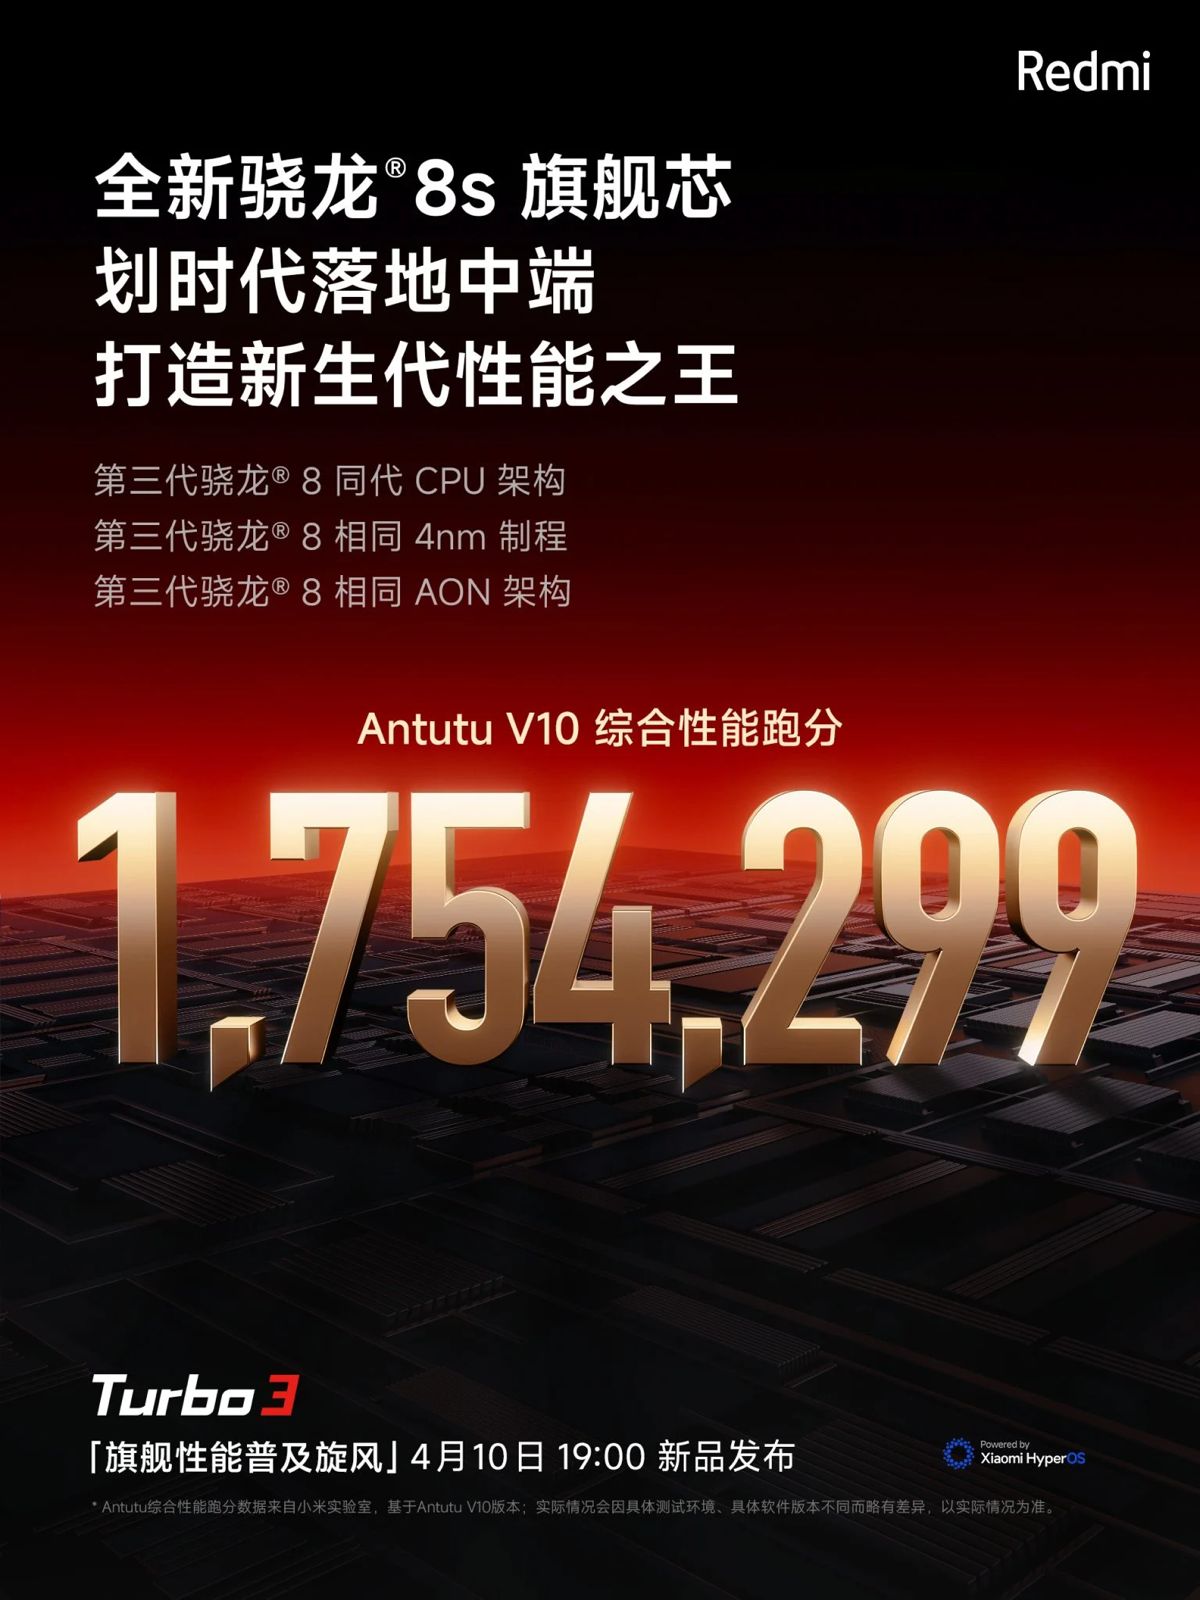 Turbo 3 has scored an impressive 1,754,299 points in AnTuTu benchmarks